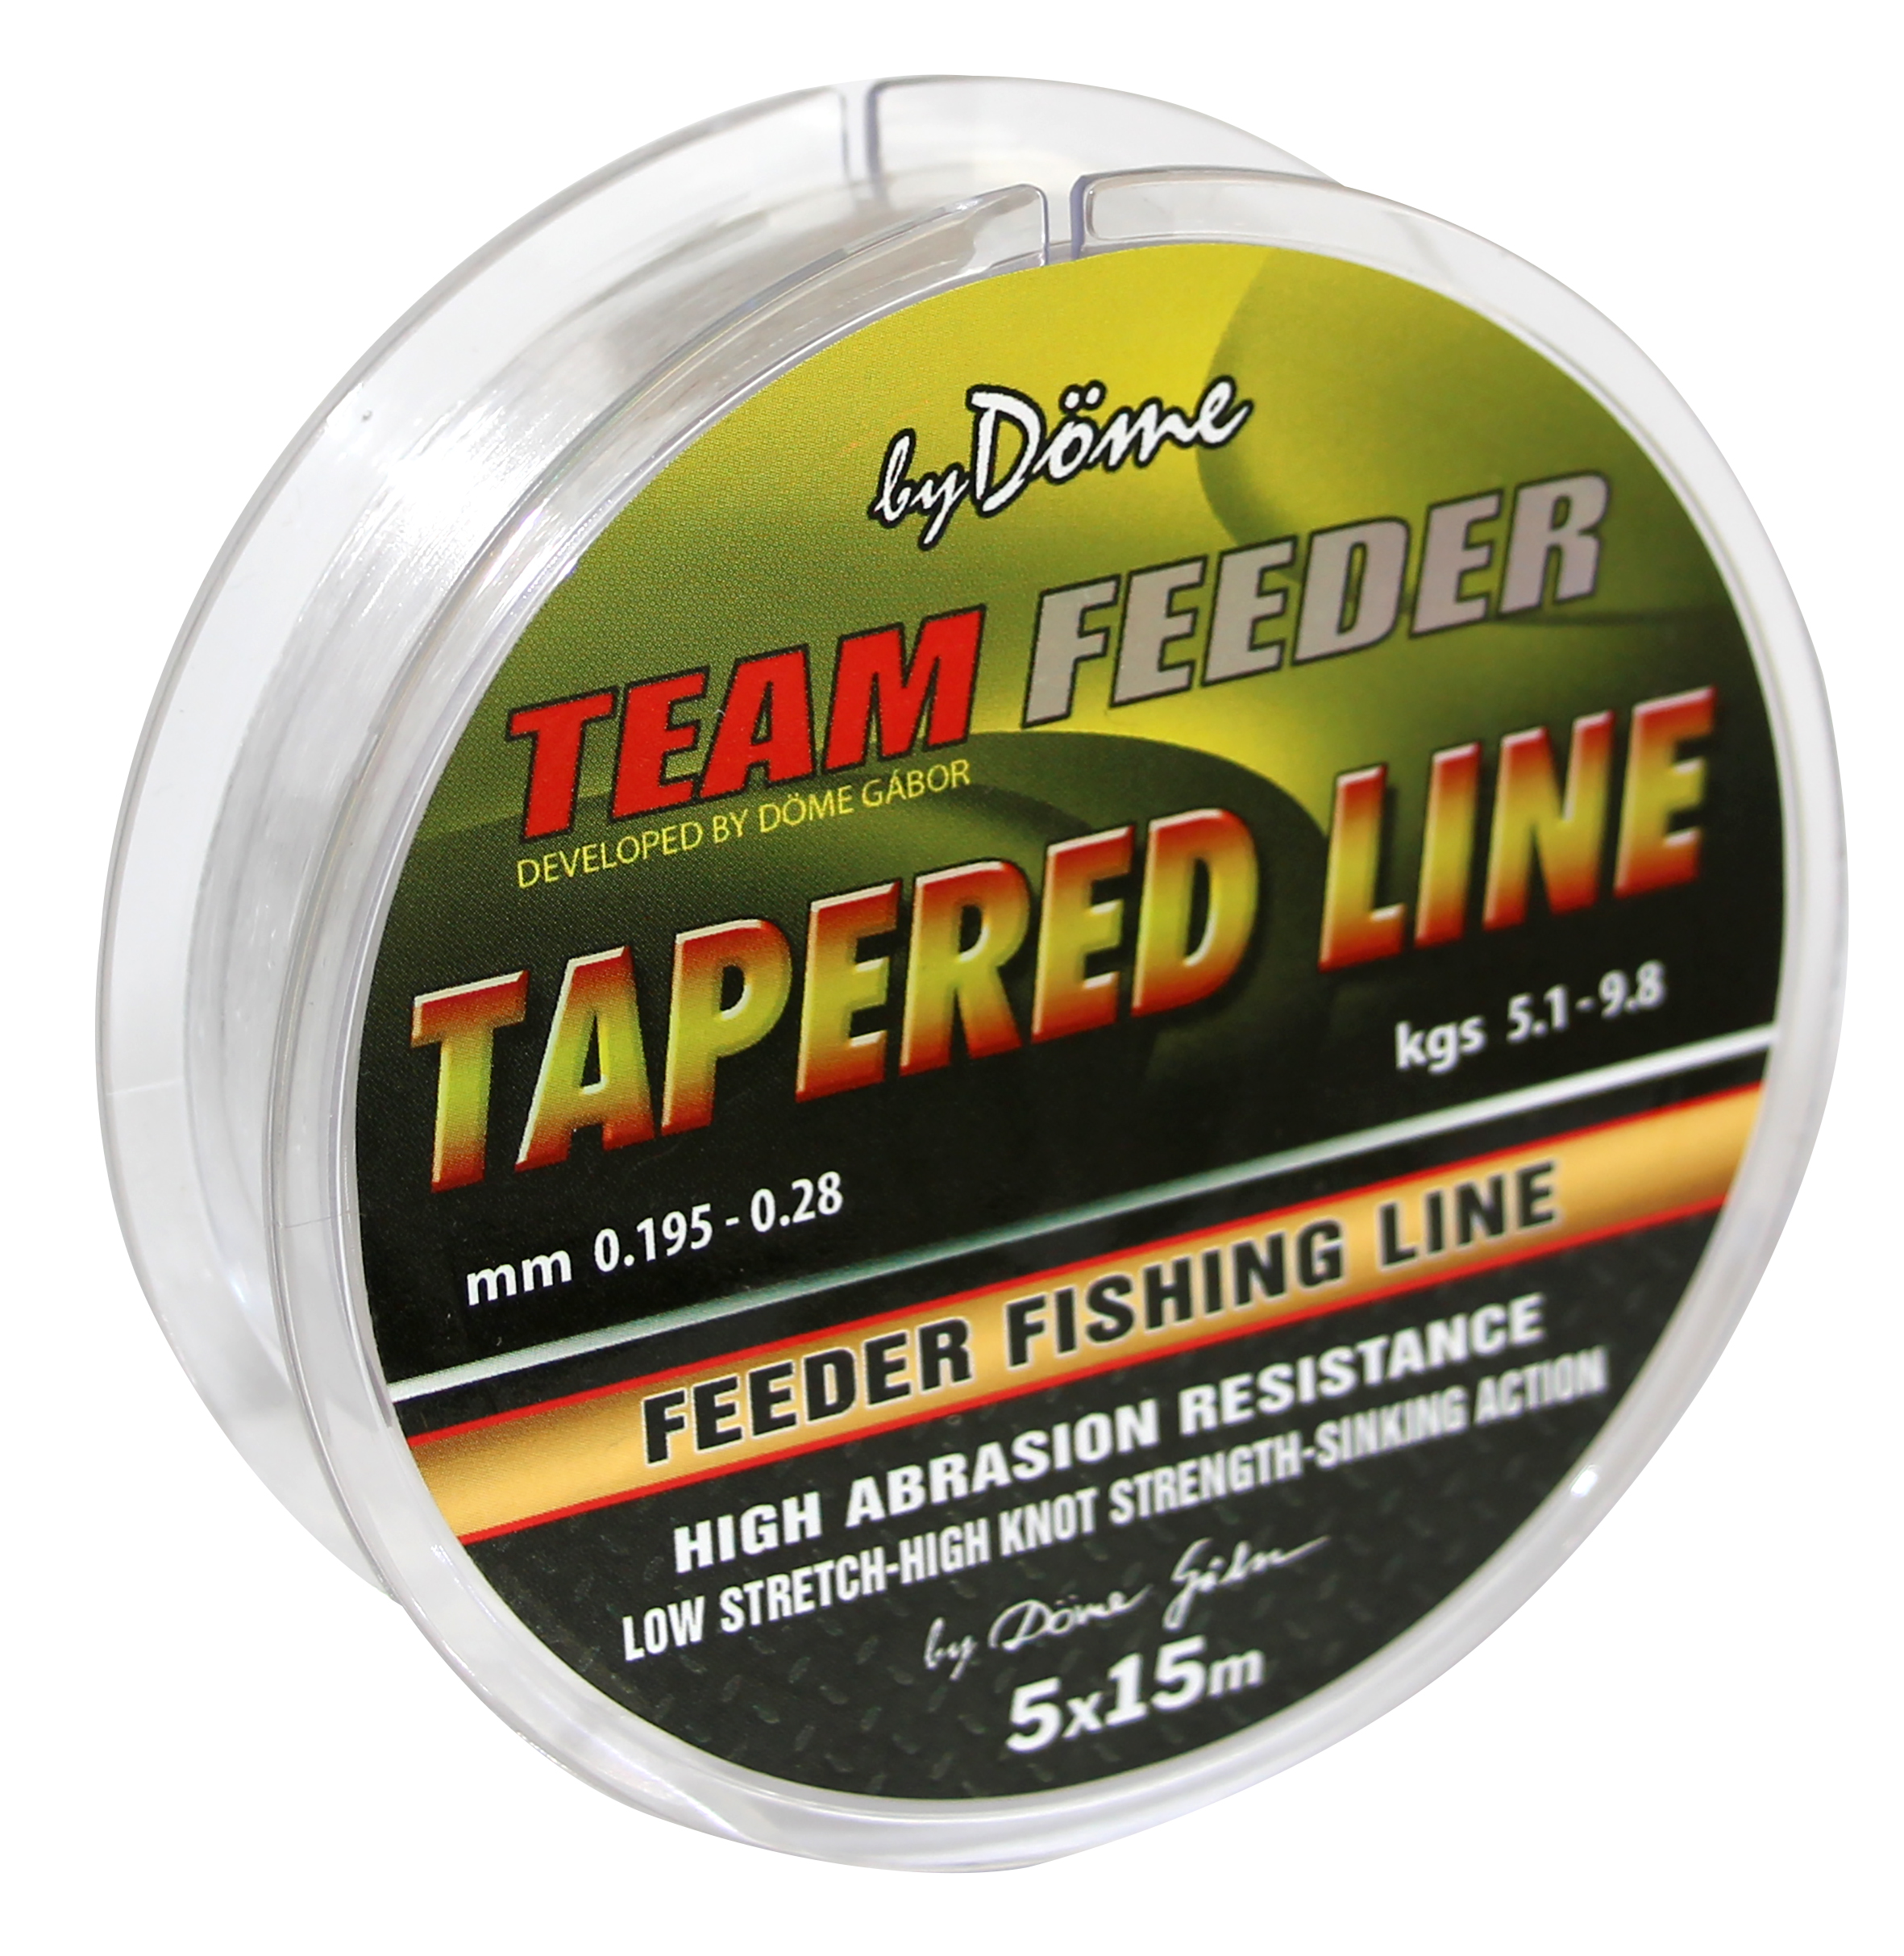 By Dme TF Tapered Leader 15m x5 0.20-0.31